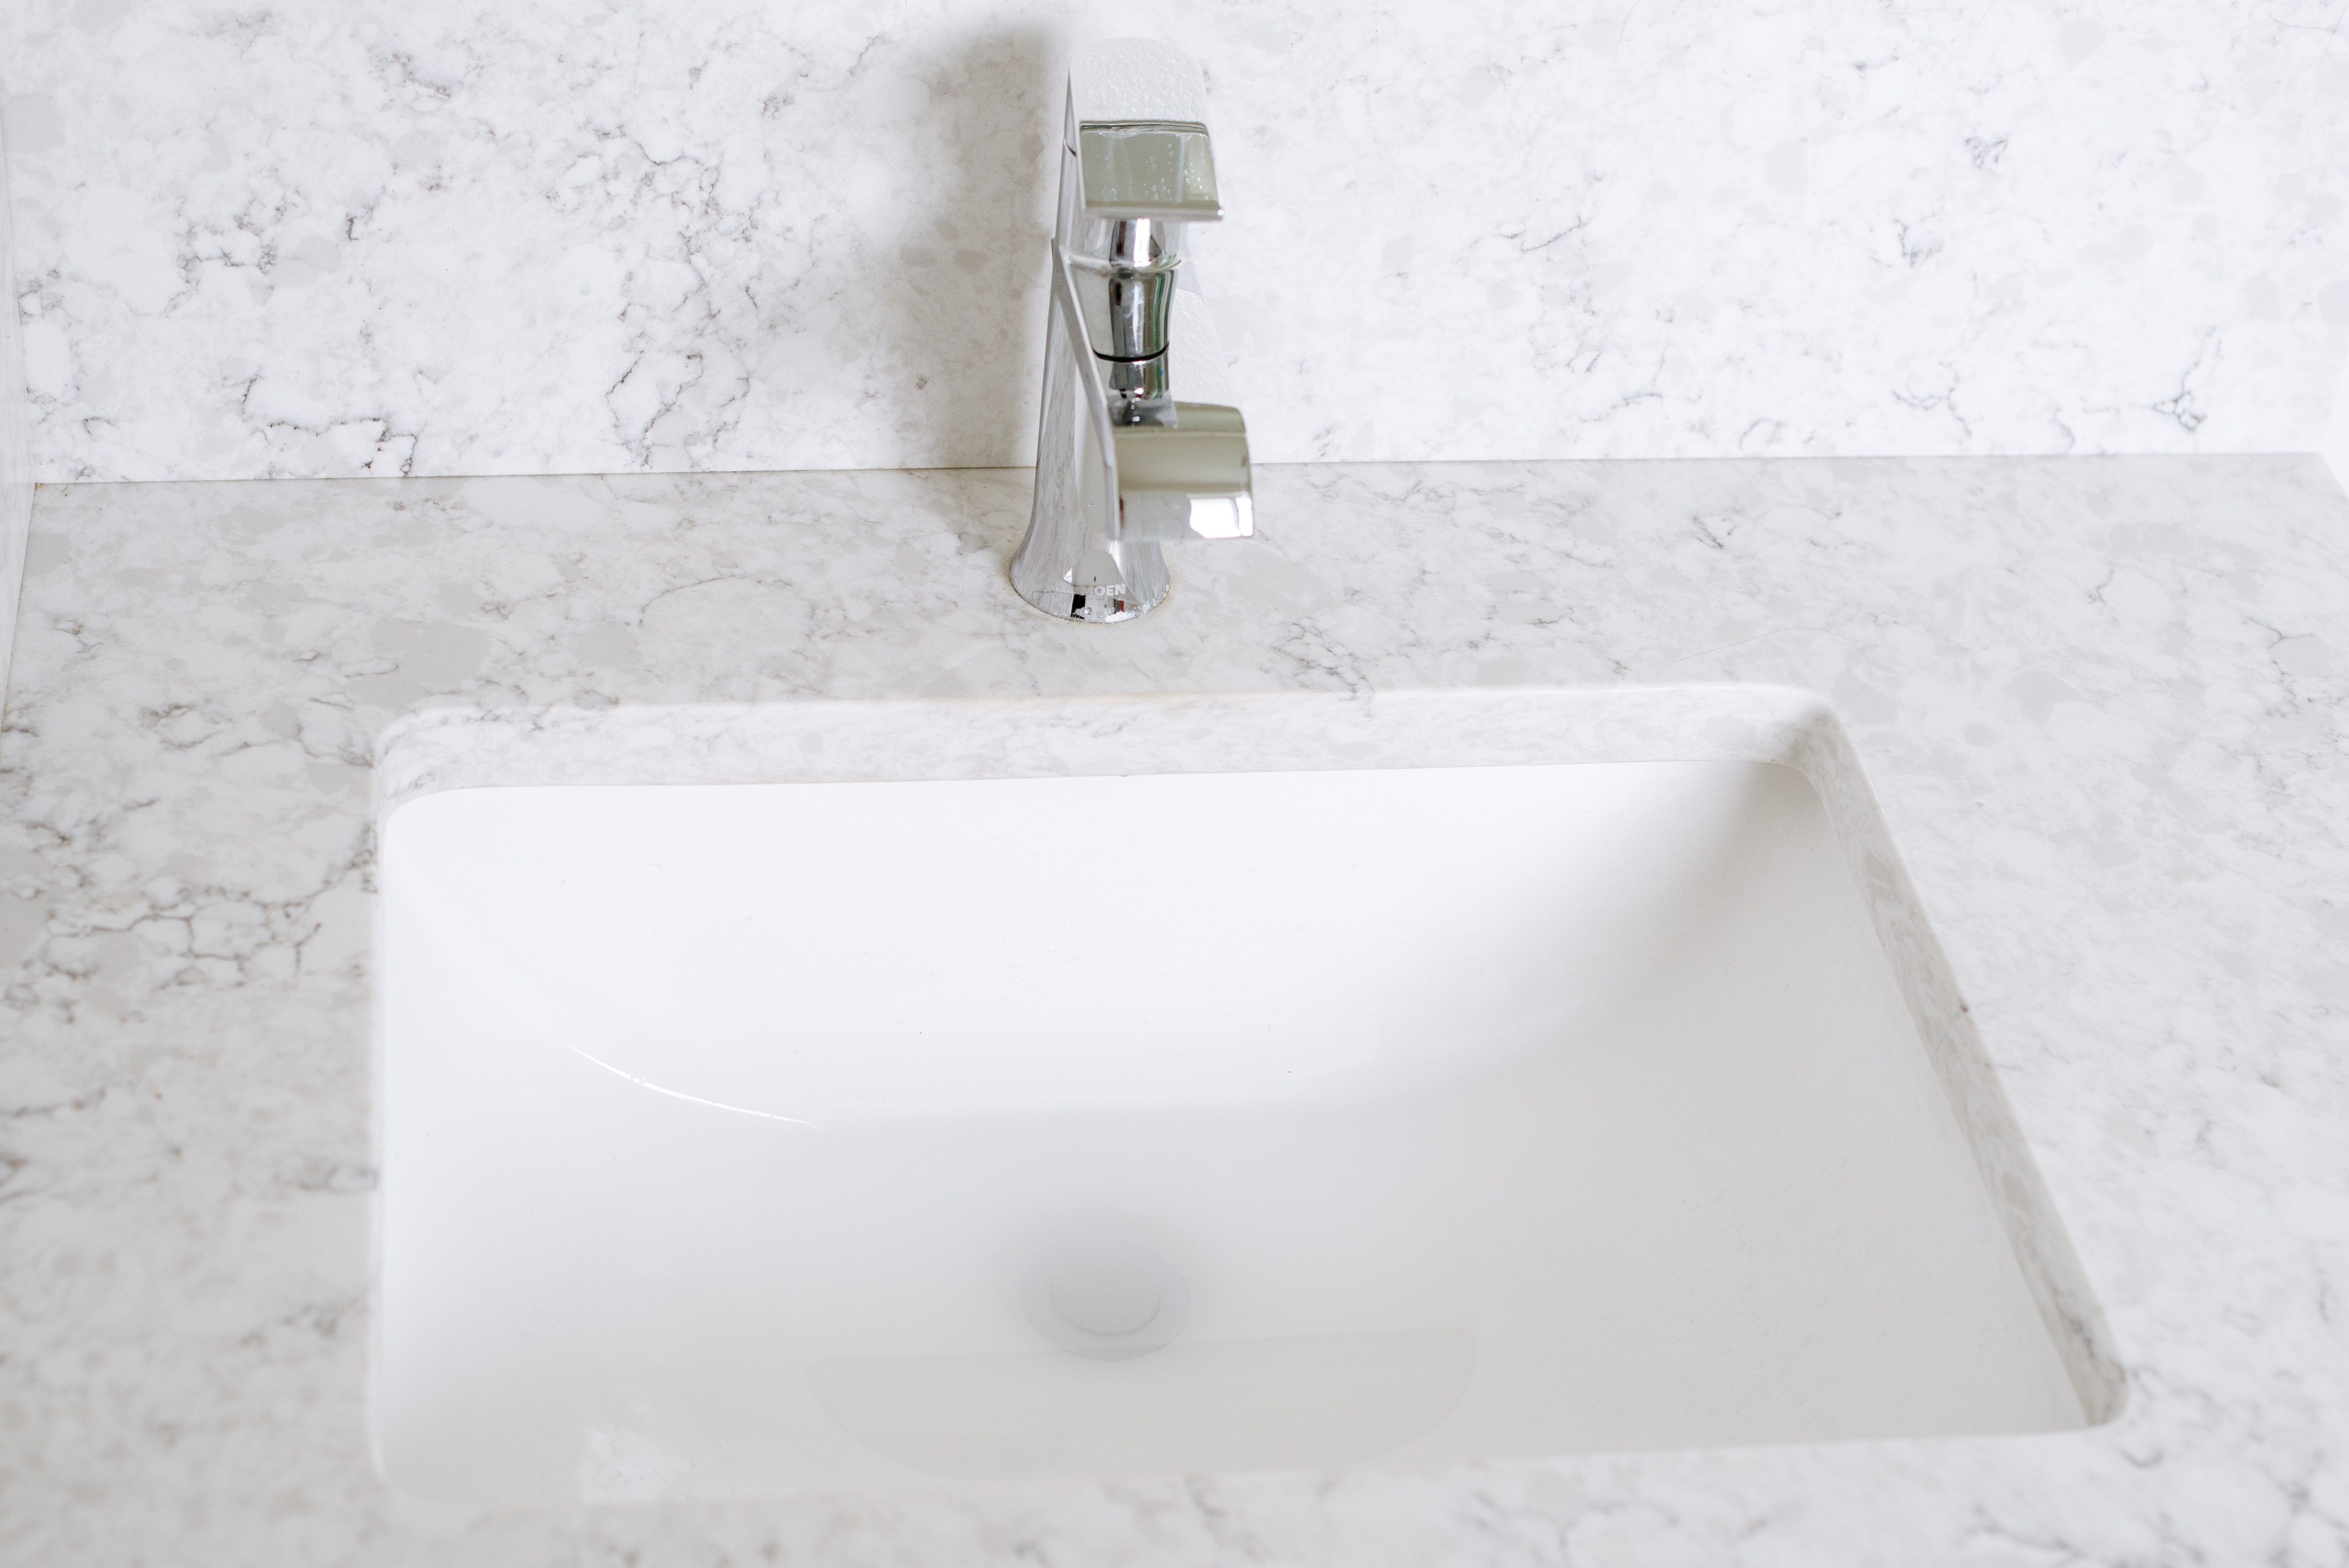 5 Easy Ways to Fix a Slow-Draining Sink